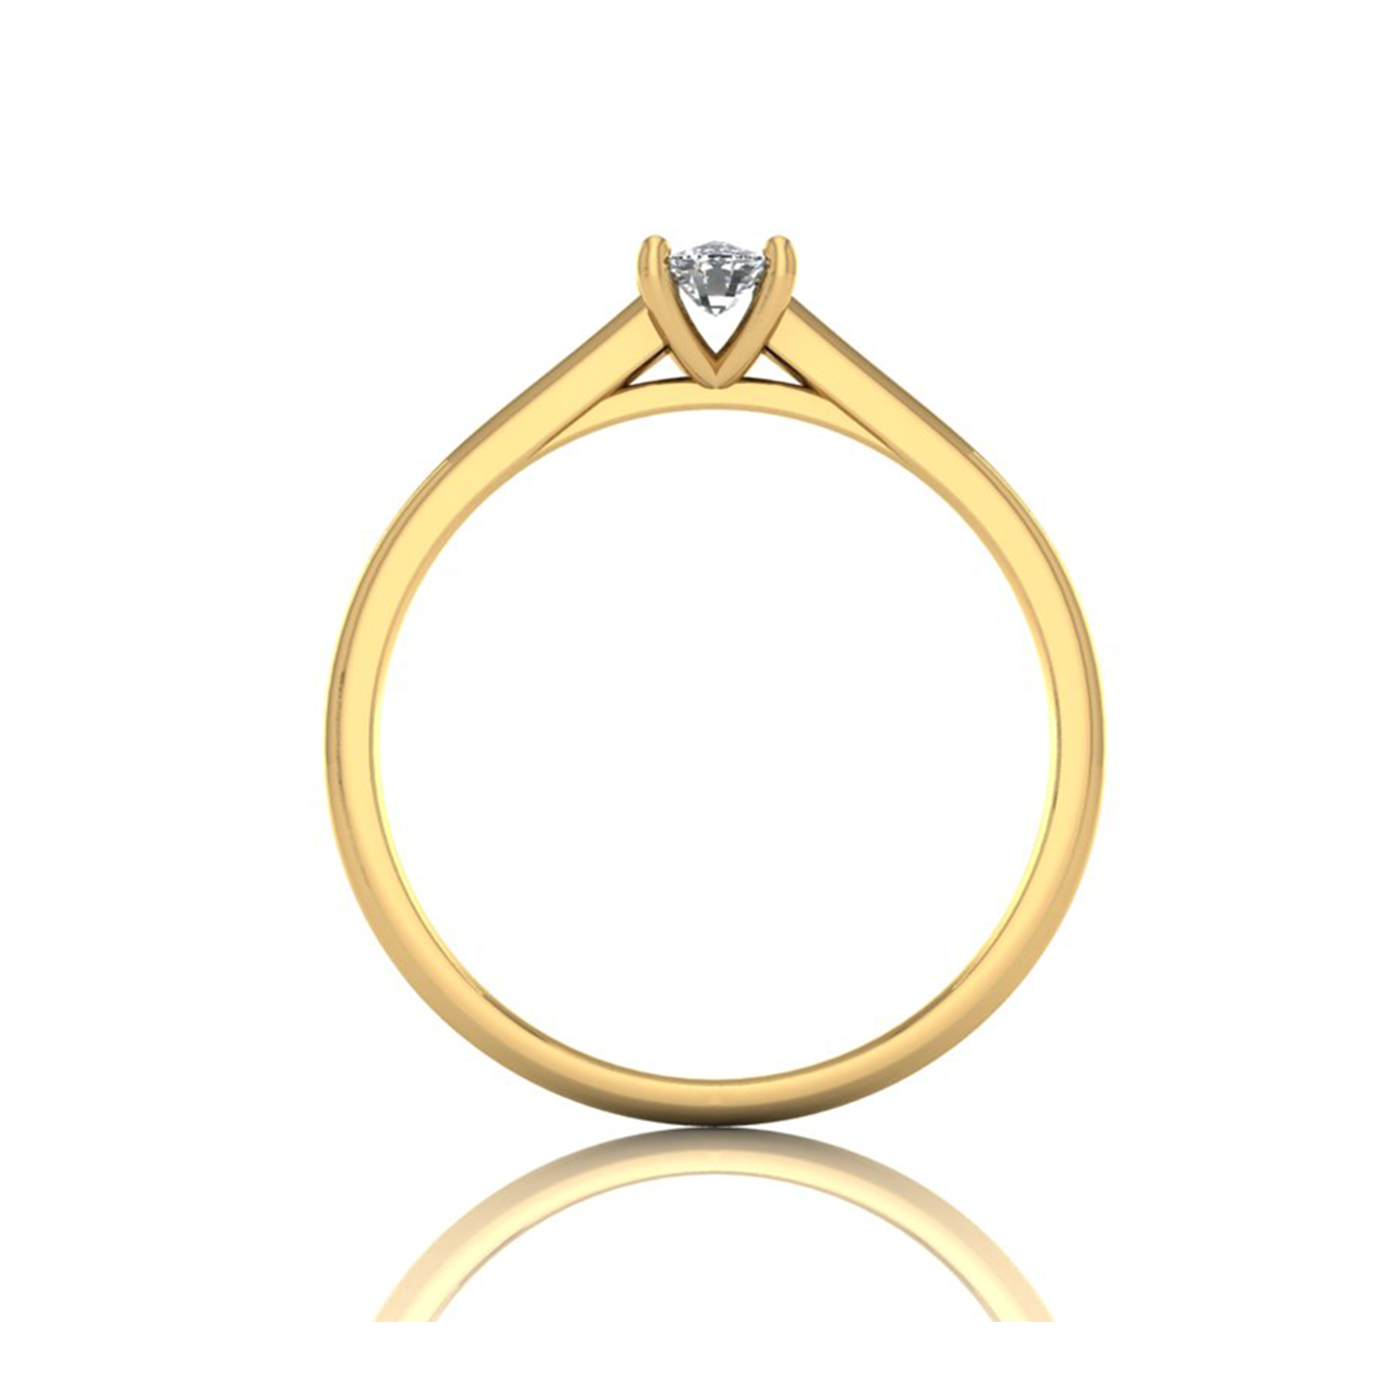 18k yellow gold  0,30 ct 4 prongs solitaire elongated cushion cut diamond engagement ring with whisper thin band